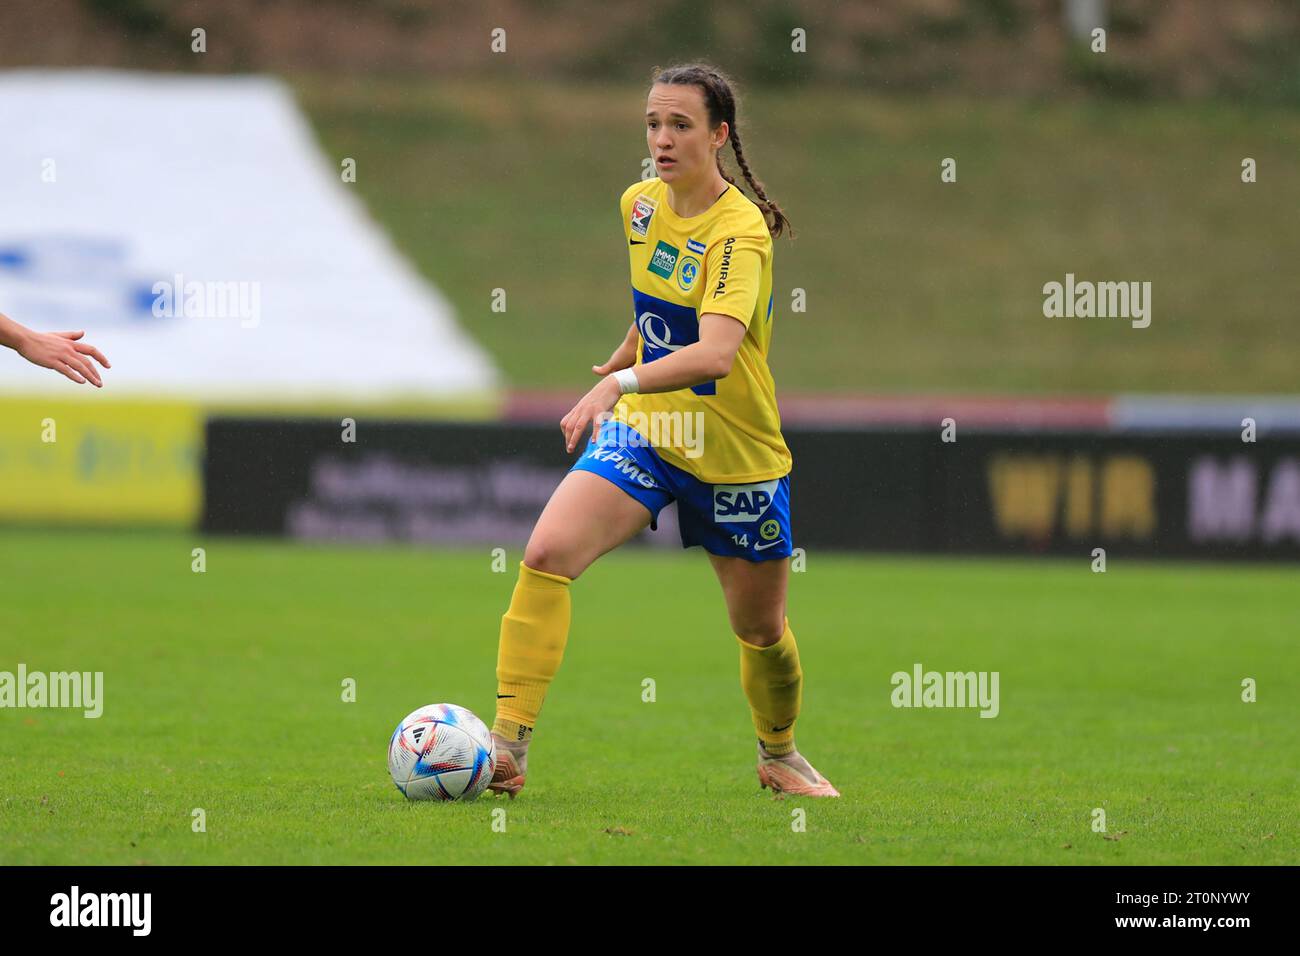 Lena Kovar (14 First Vienna FC) in action during the Admiral Frauen Bundesliga match First Vienna FC vs SCR Altach at Hohe Warte  (Tom Seiss/ SPP) Stock Photo